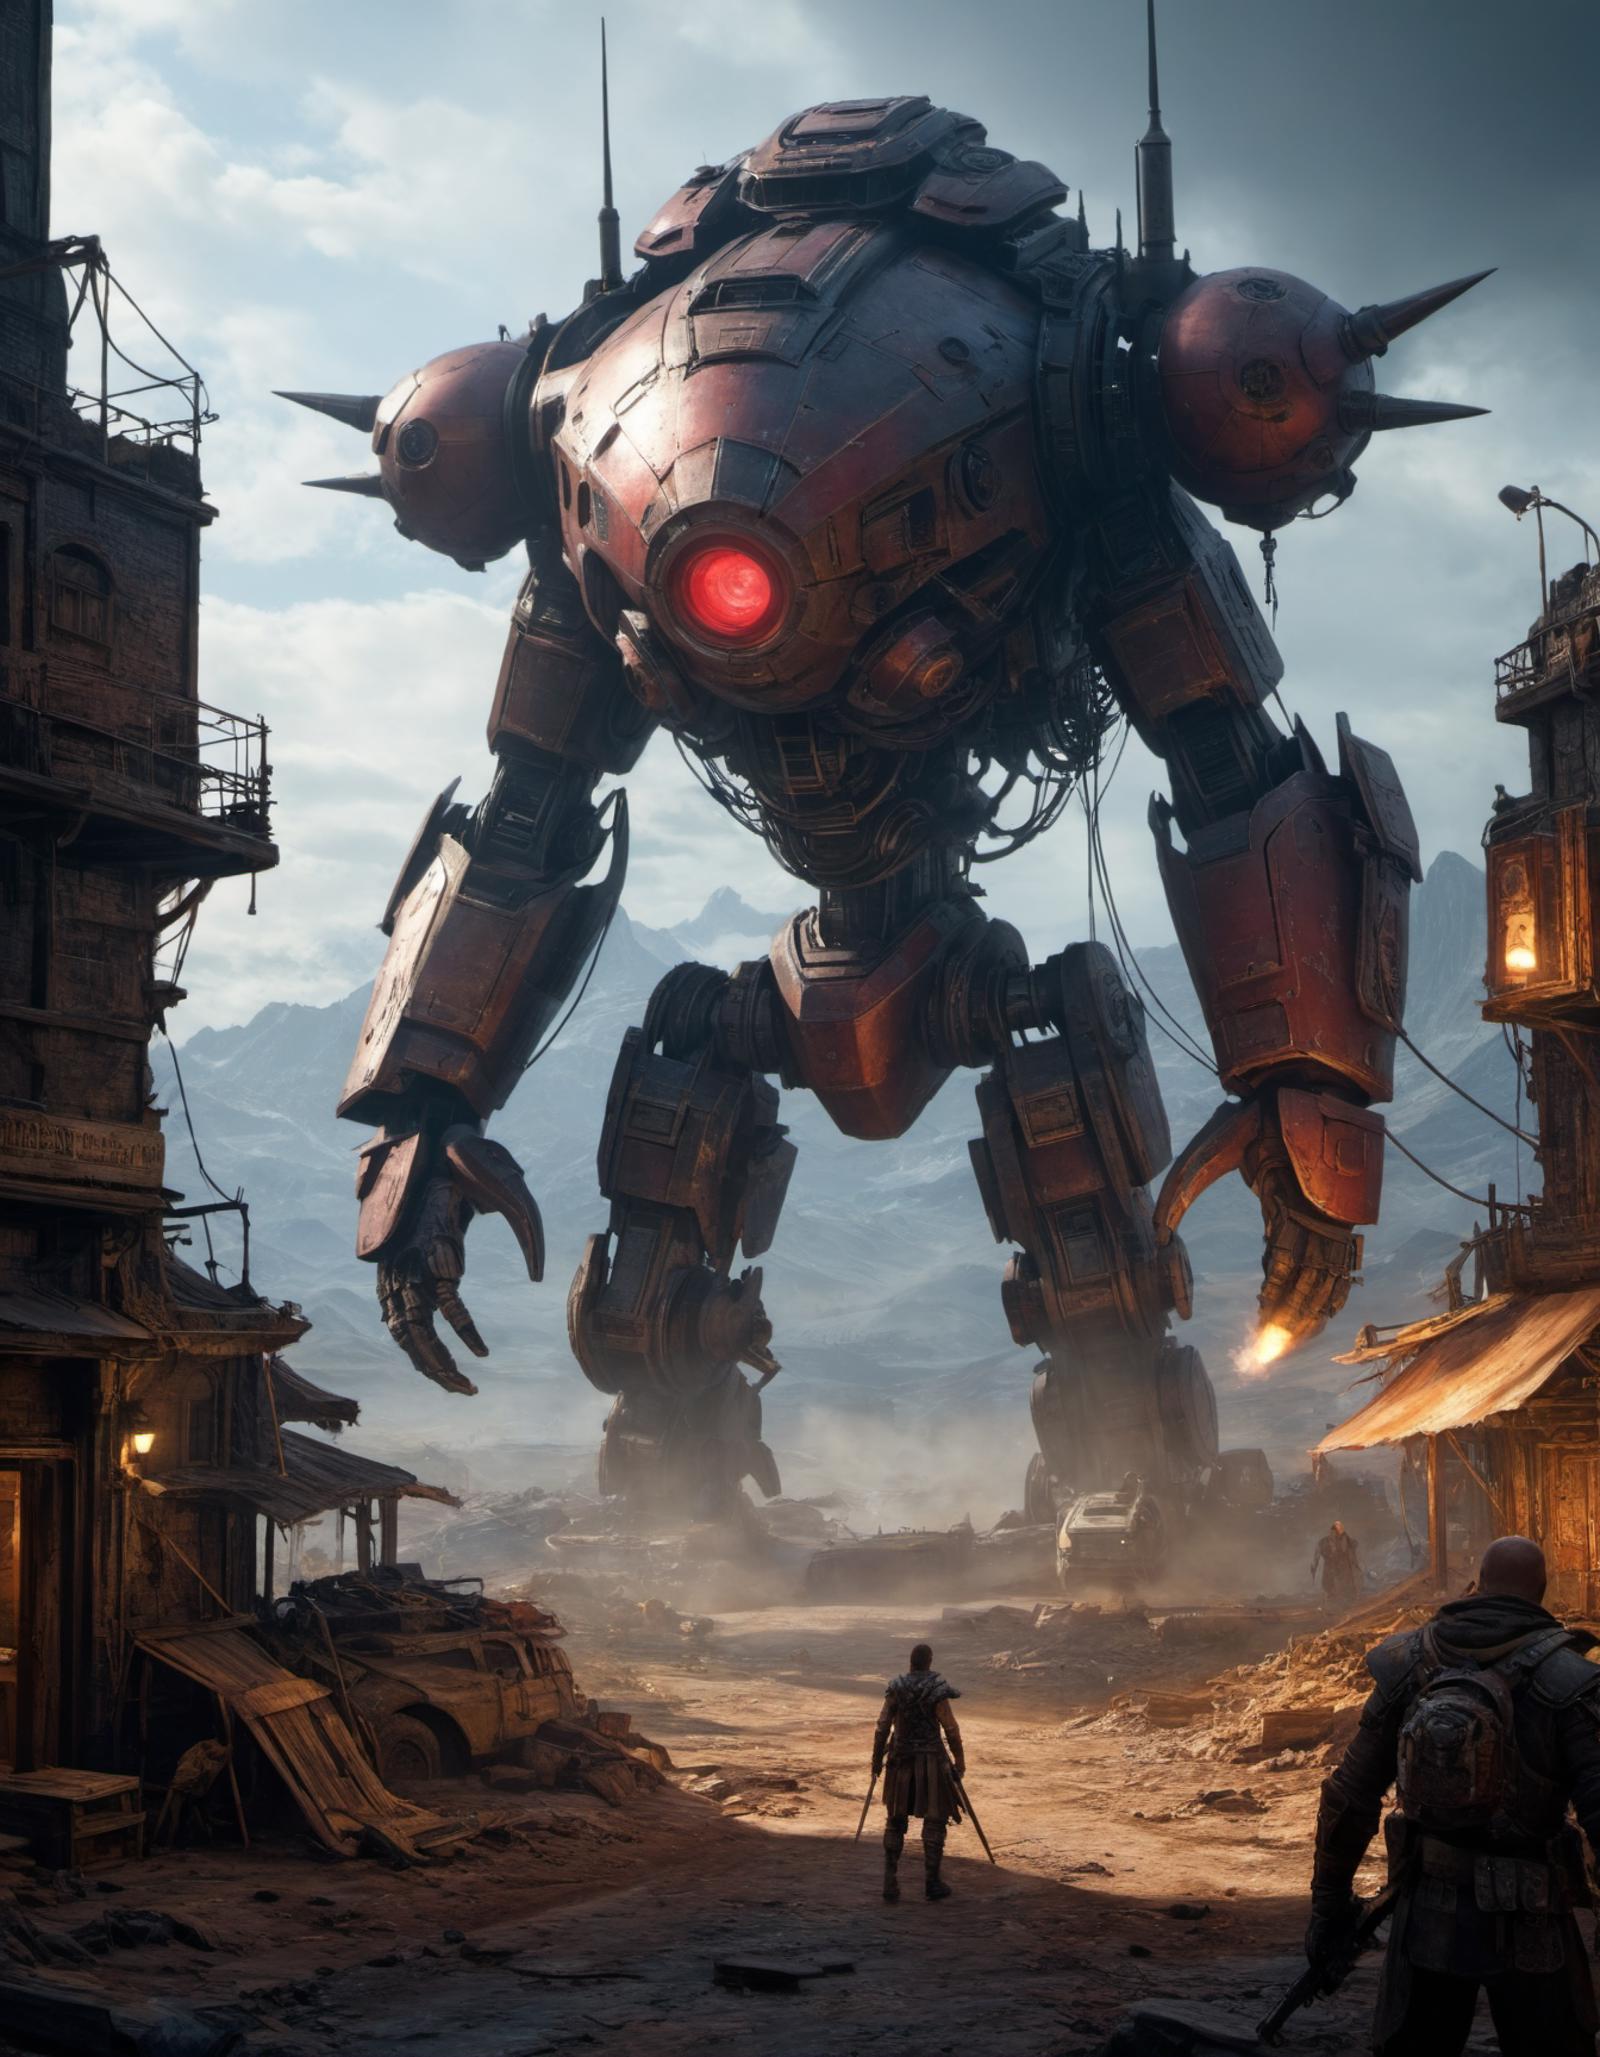 A man and a robot standing in front of a ruined building in a post-apocalyptic city.